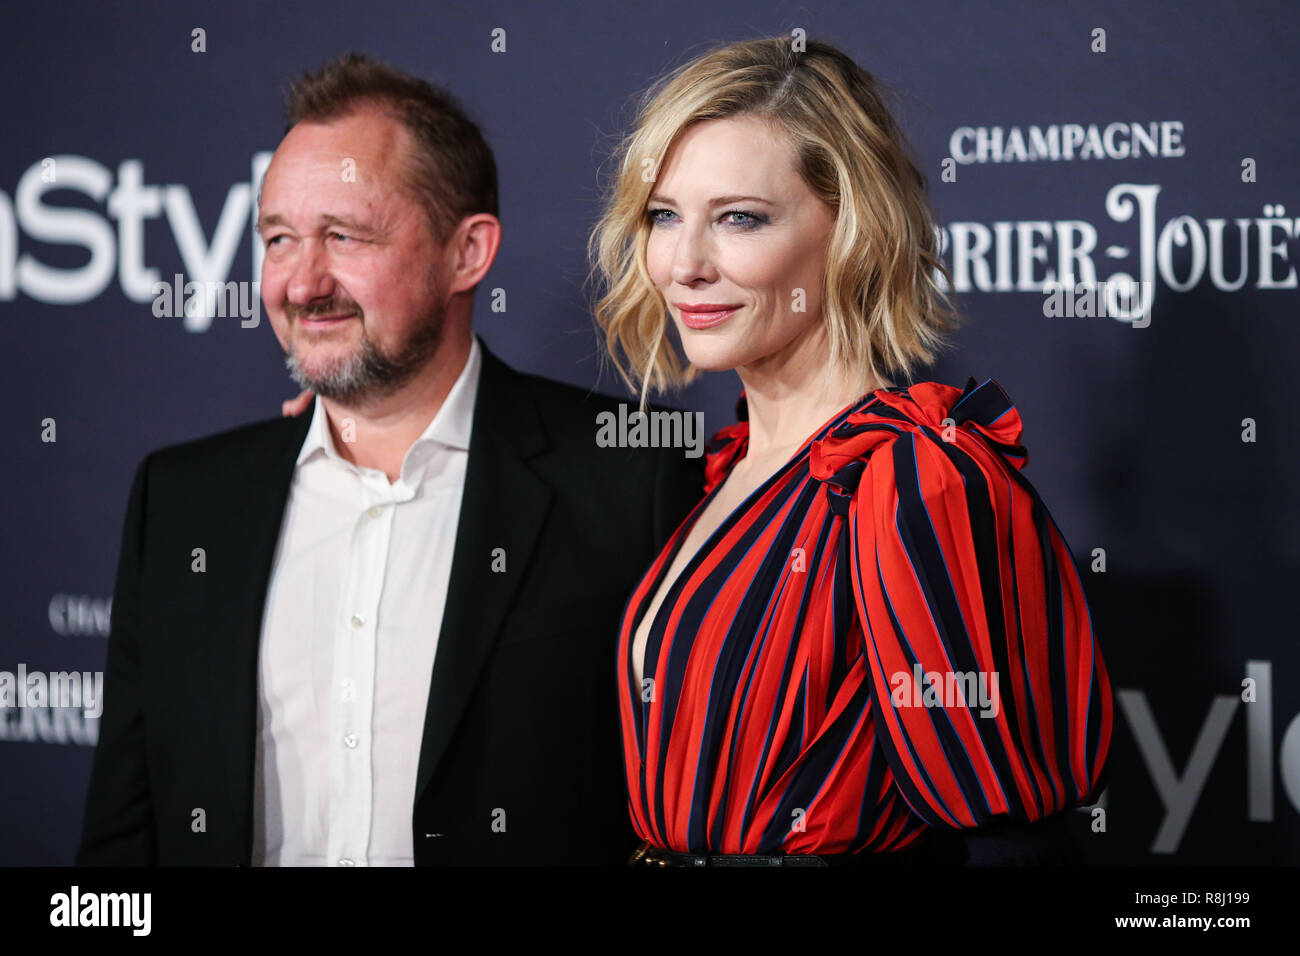 LOS ANGELES, CA, USA - OCTOBER 23: Andrew Upton, Cate Blanchett at the InStyle Awards 2017 held at the Getty Center on October 23, 2017 in Los Angeles, California, United States. (Photo by Xavier Collin/Image Press Agency) Stock Photo